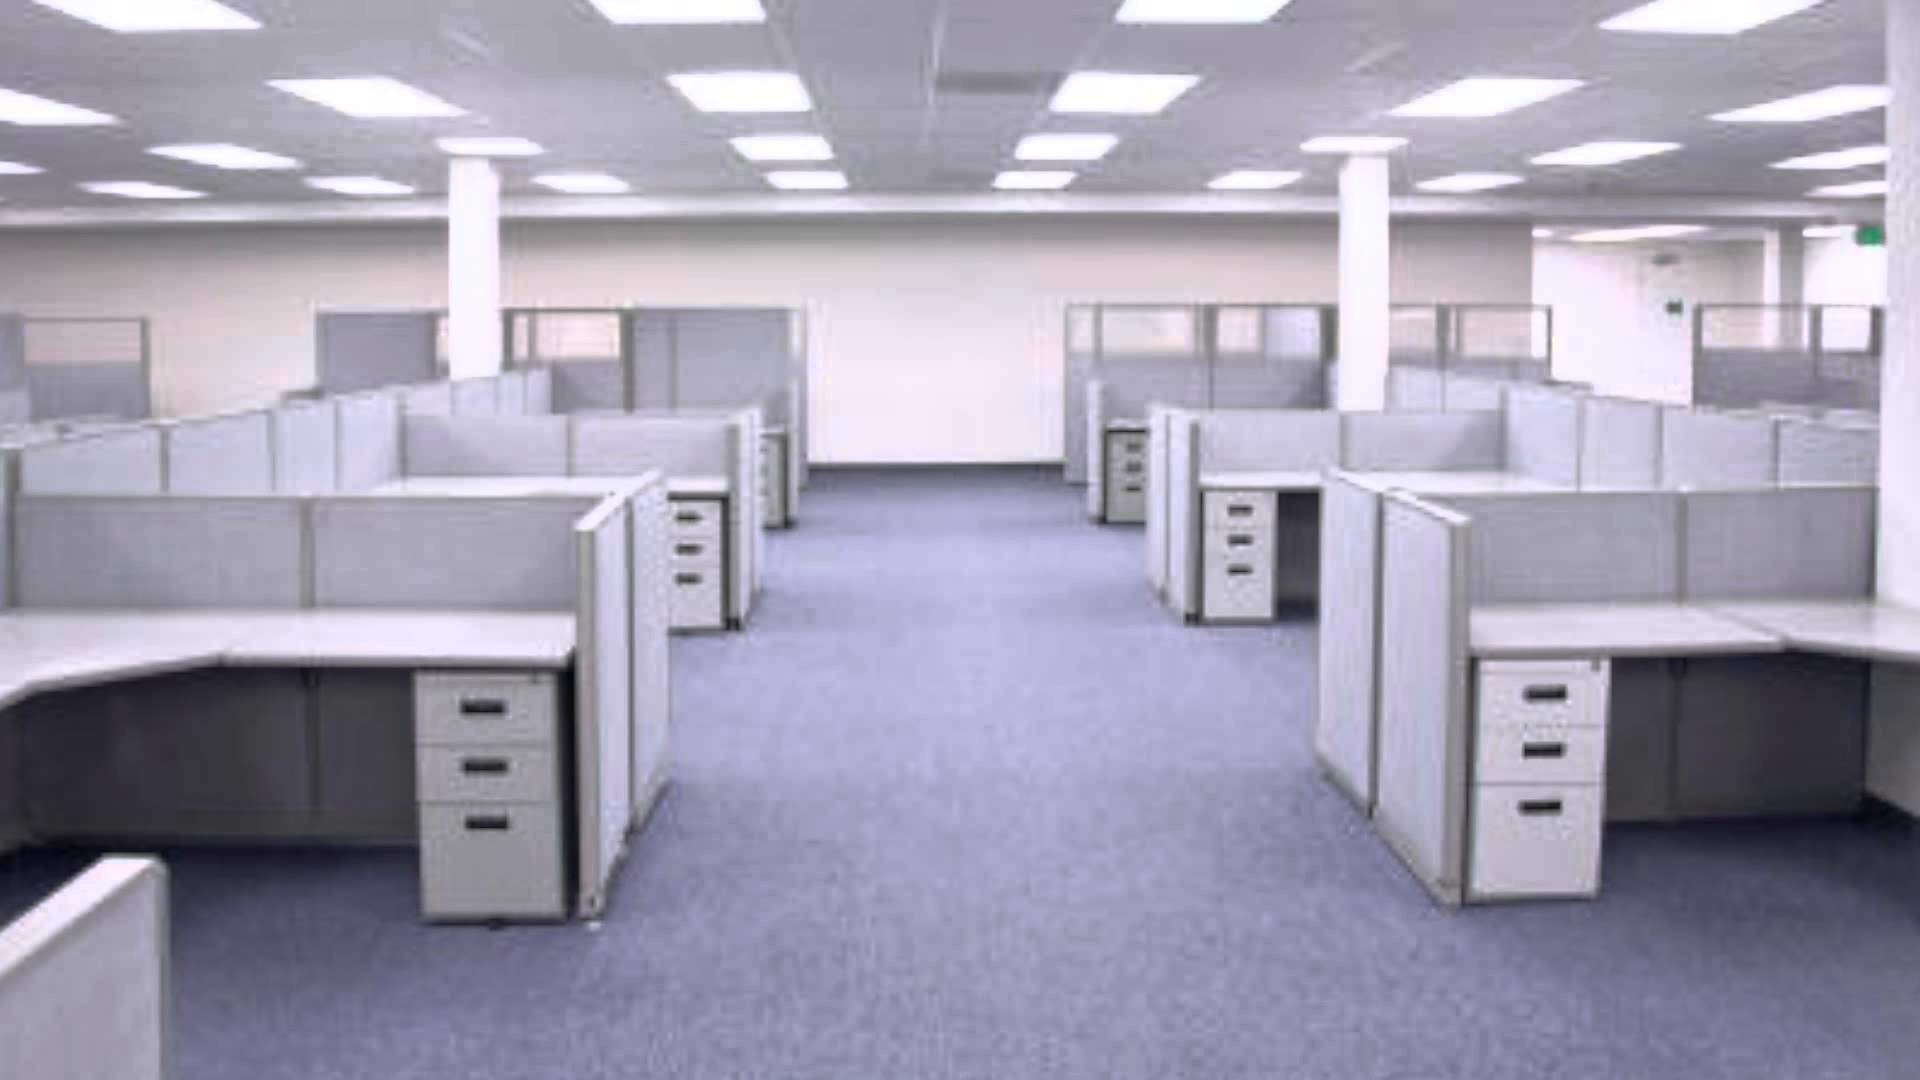 Room Tone Large Empty Office Sound Fx 
 Data-src - High Resolution Office Backgrounds - HD Wallpaper 